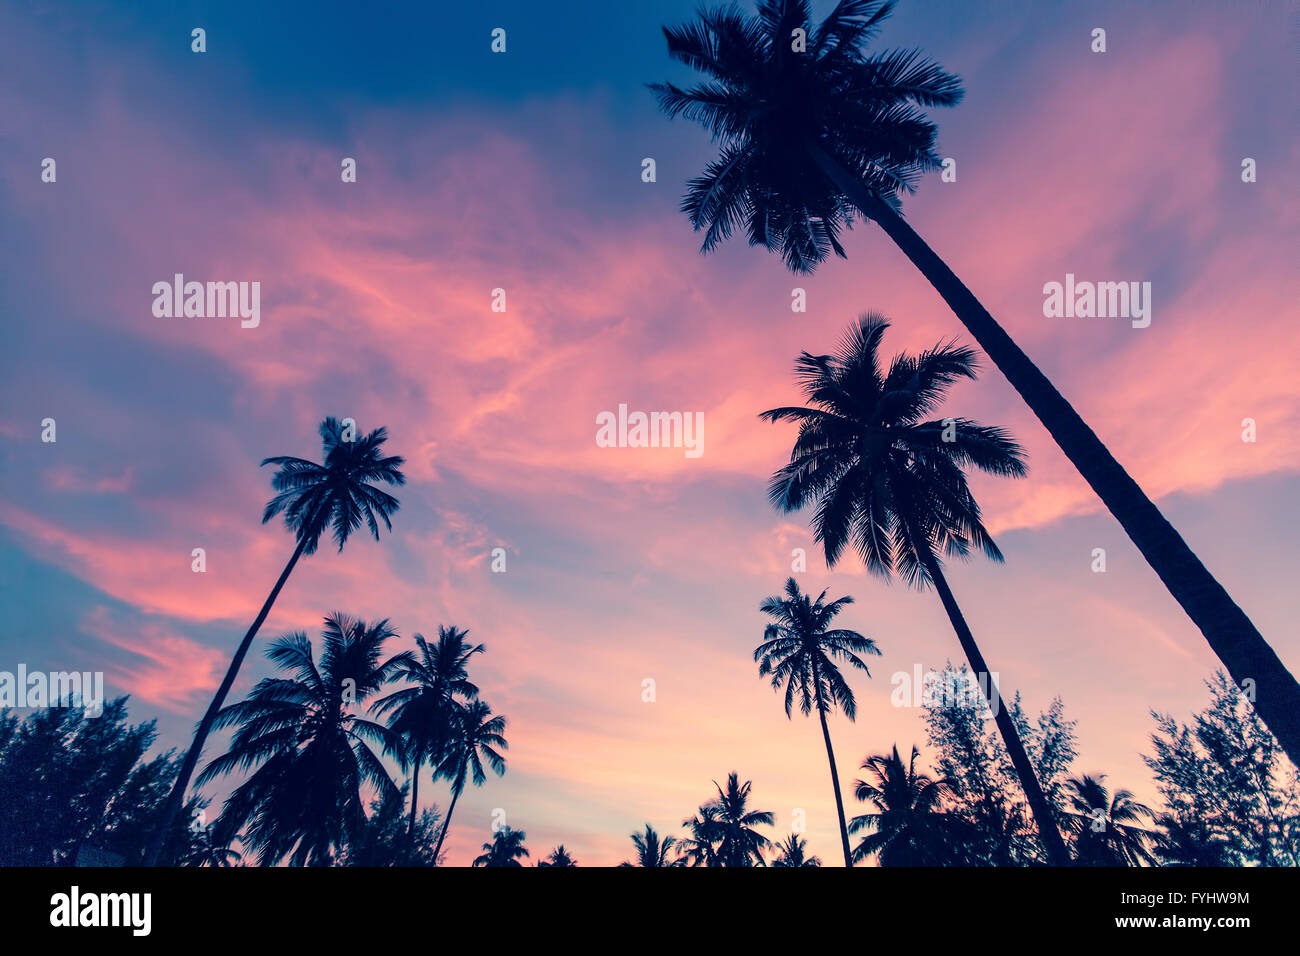 Silhouettes of palm trees against the sky at dusk. Stock Photo